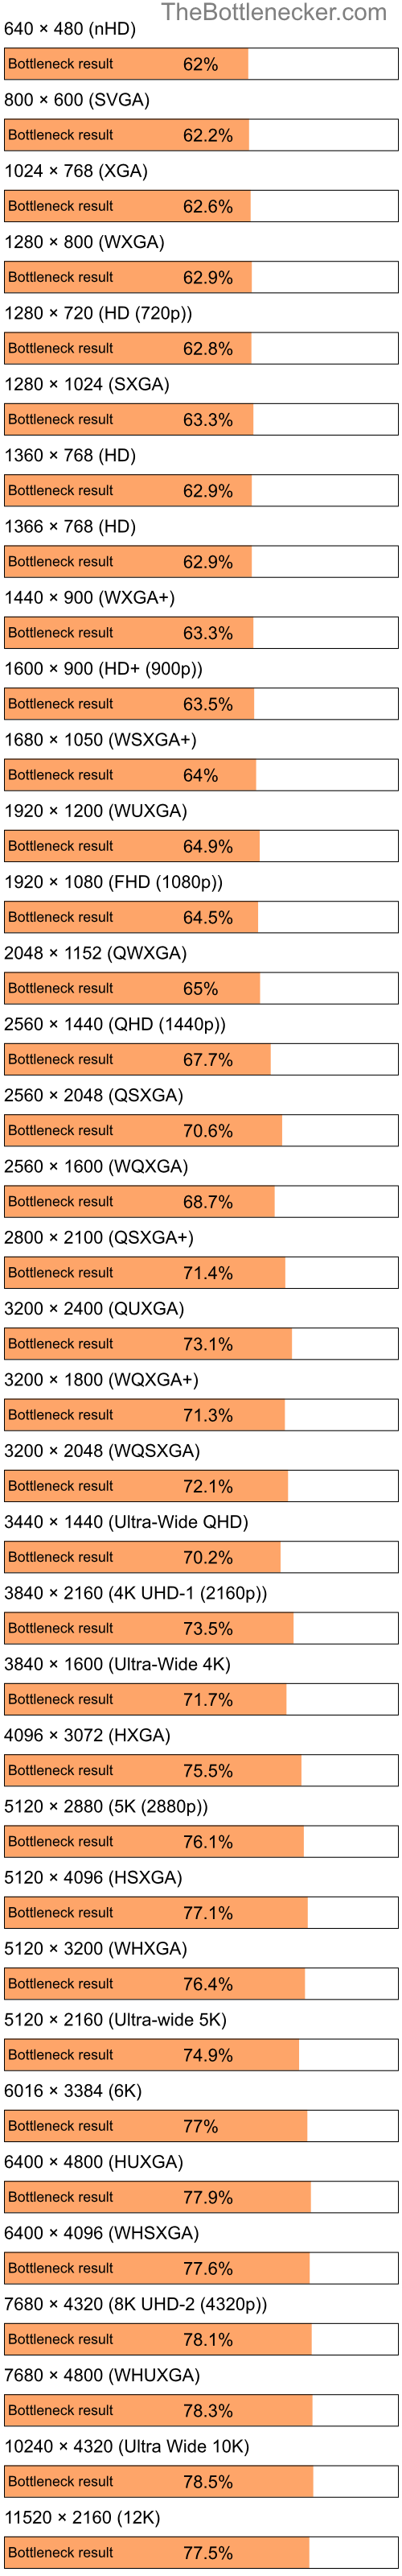 Bottleneck results by resolution for Intel Pentium 4 and NVIDIA GeForce 9400M G in Processor Intense Tasks